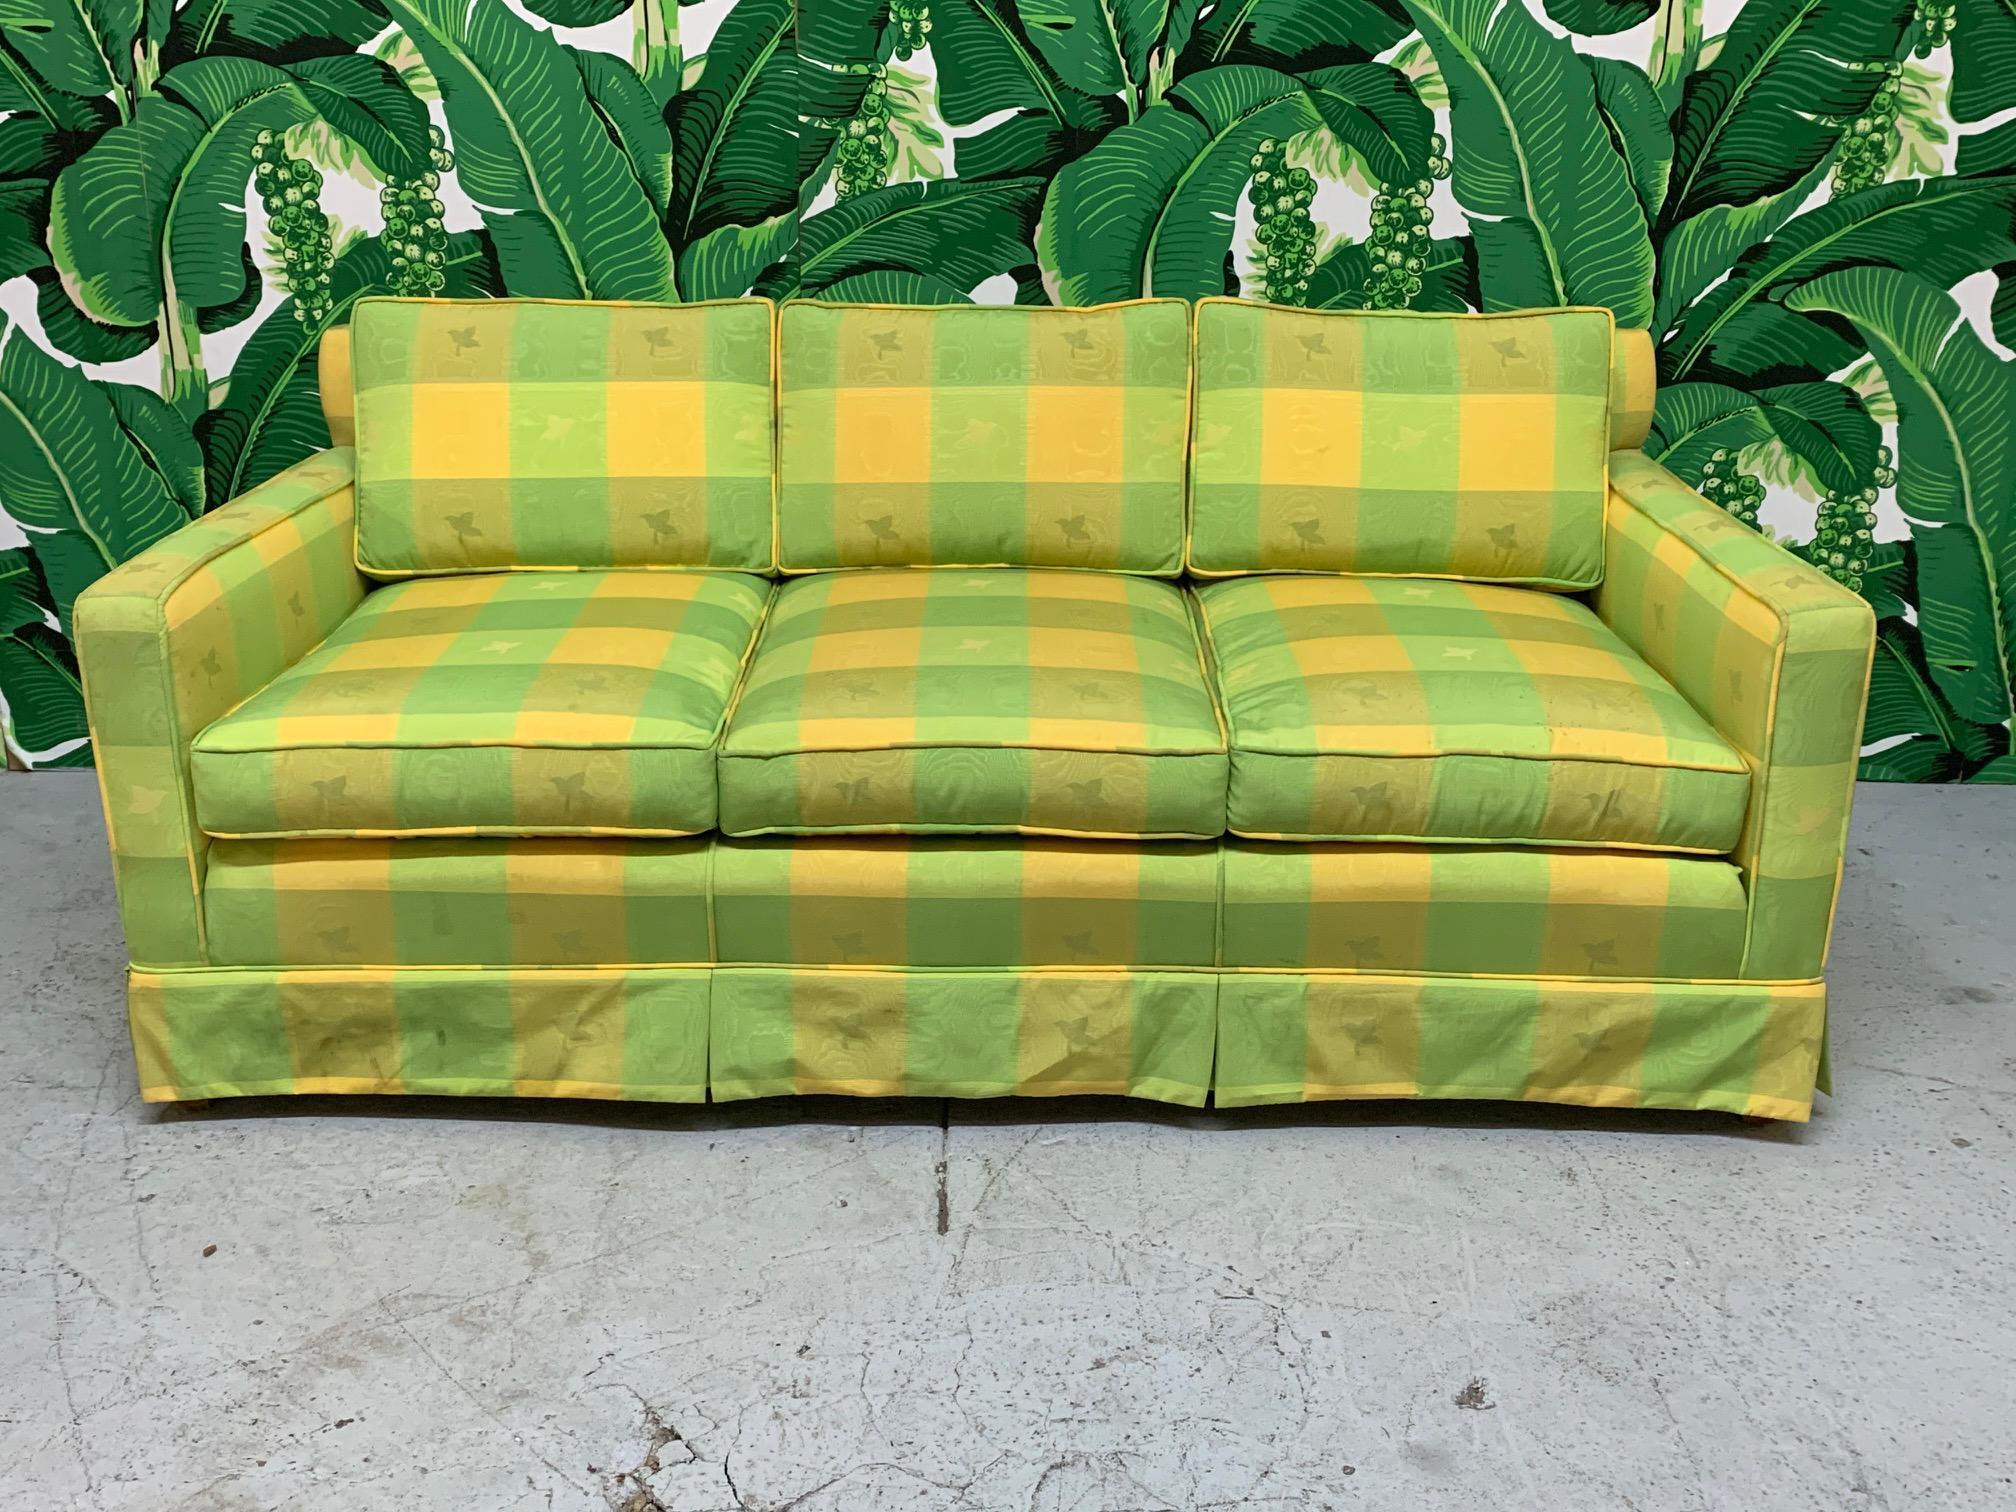 Vintage green and yellow plaid sofa in the manner of Dorothy Draper. Cheerful and fun print that will add a bright touch to any decor. Very good condition structurally and cosmetically with no stains or tears to fabric.
 
1960s.